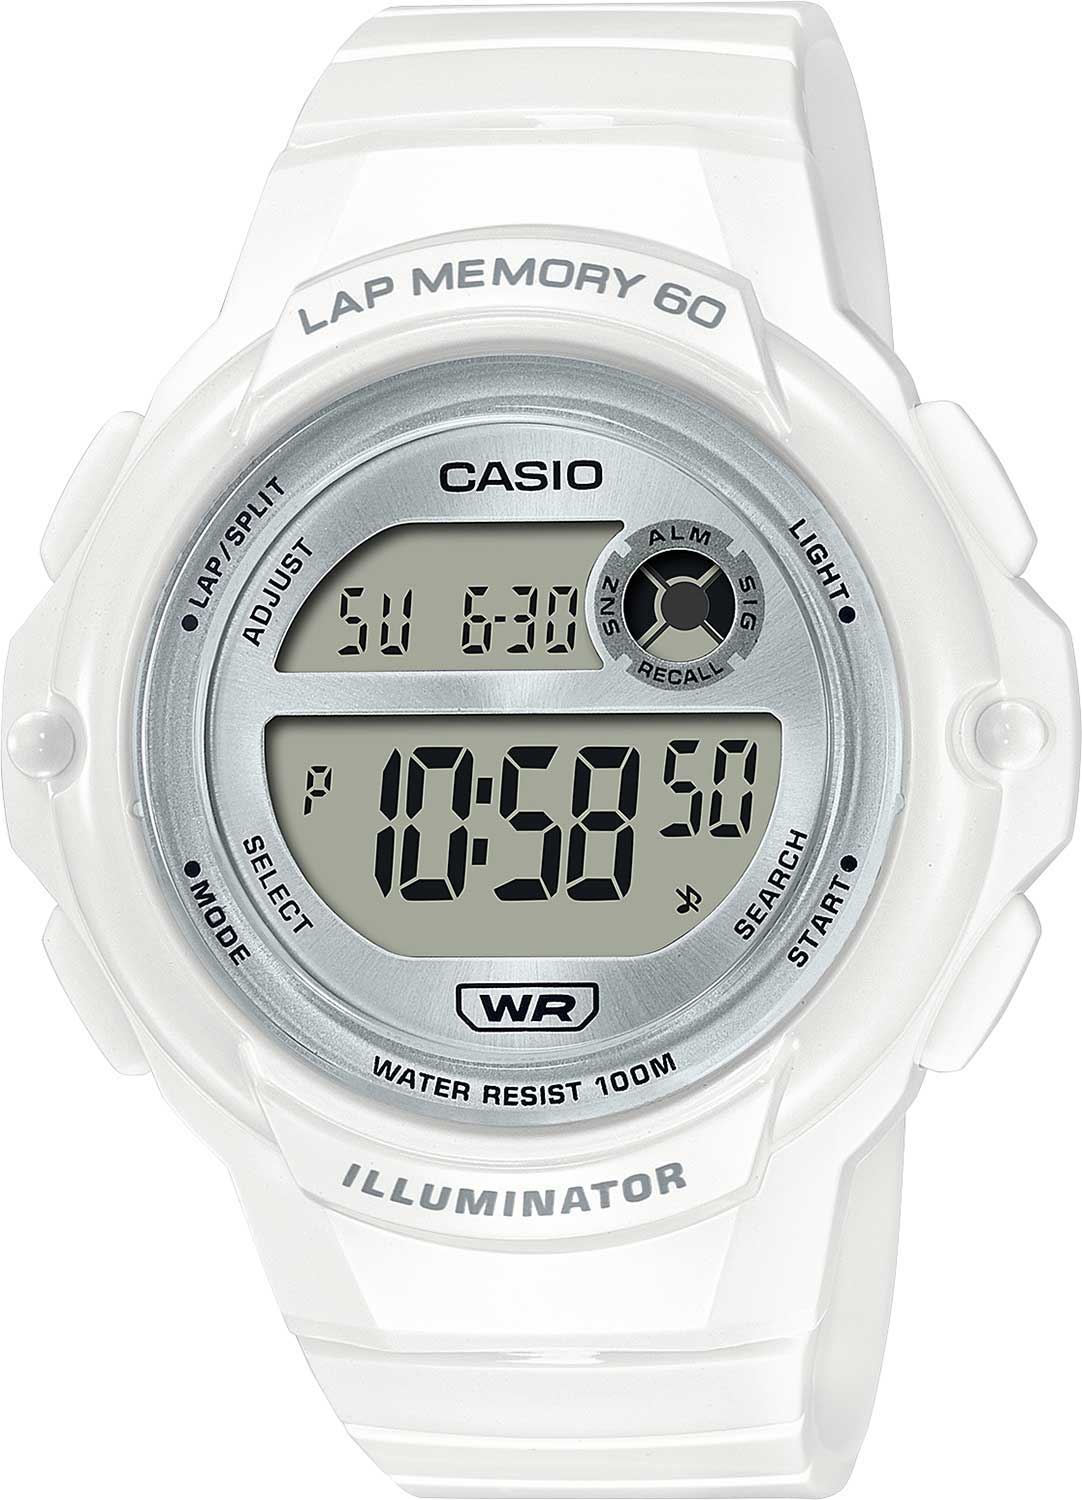    Casio Collection LWS-1200H-7A1  